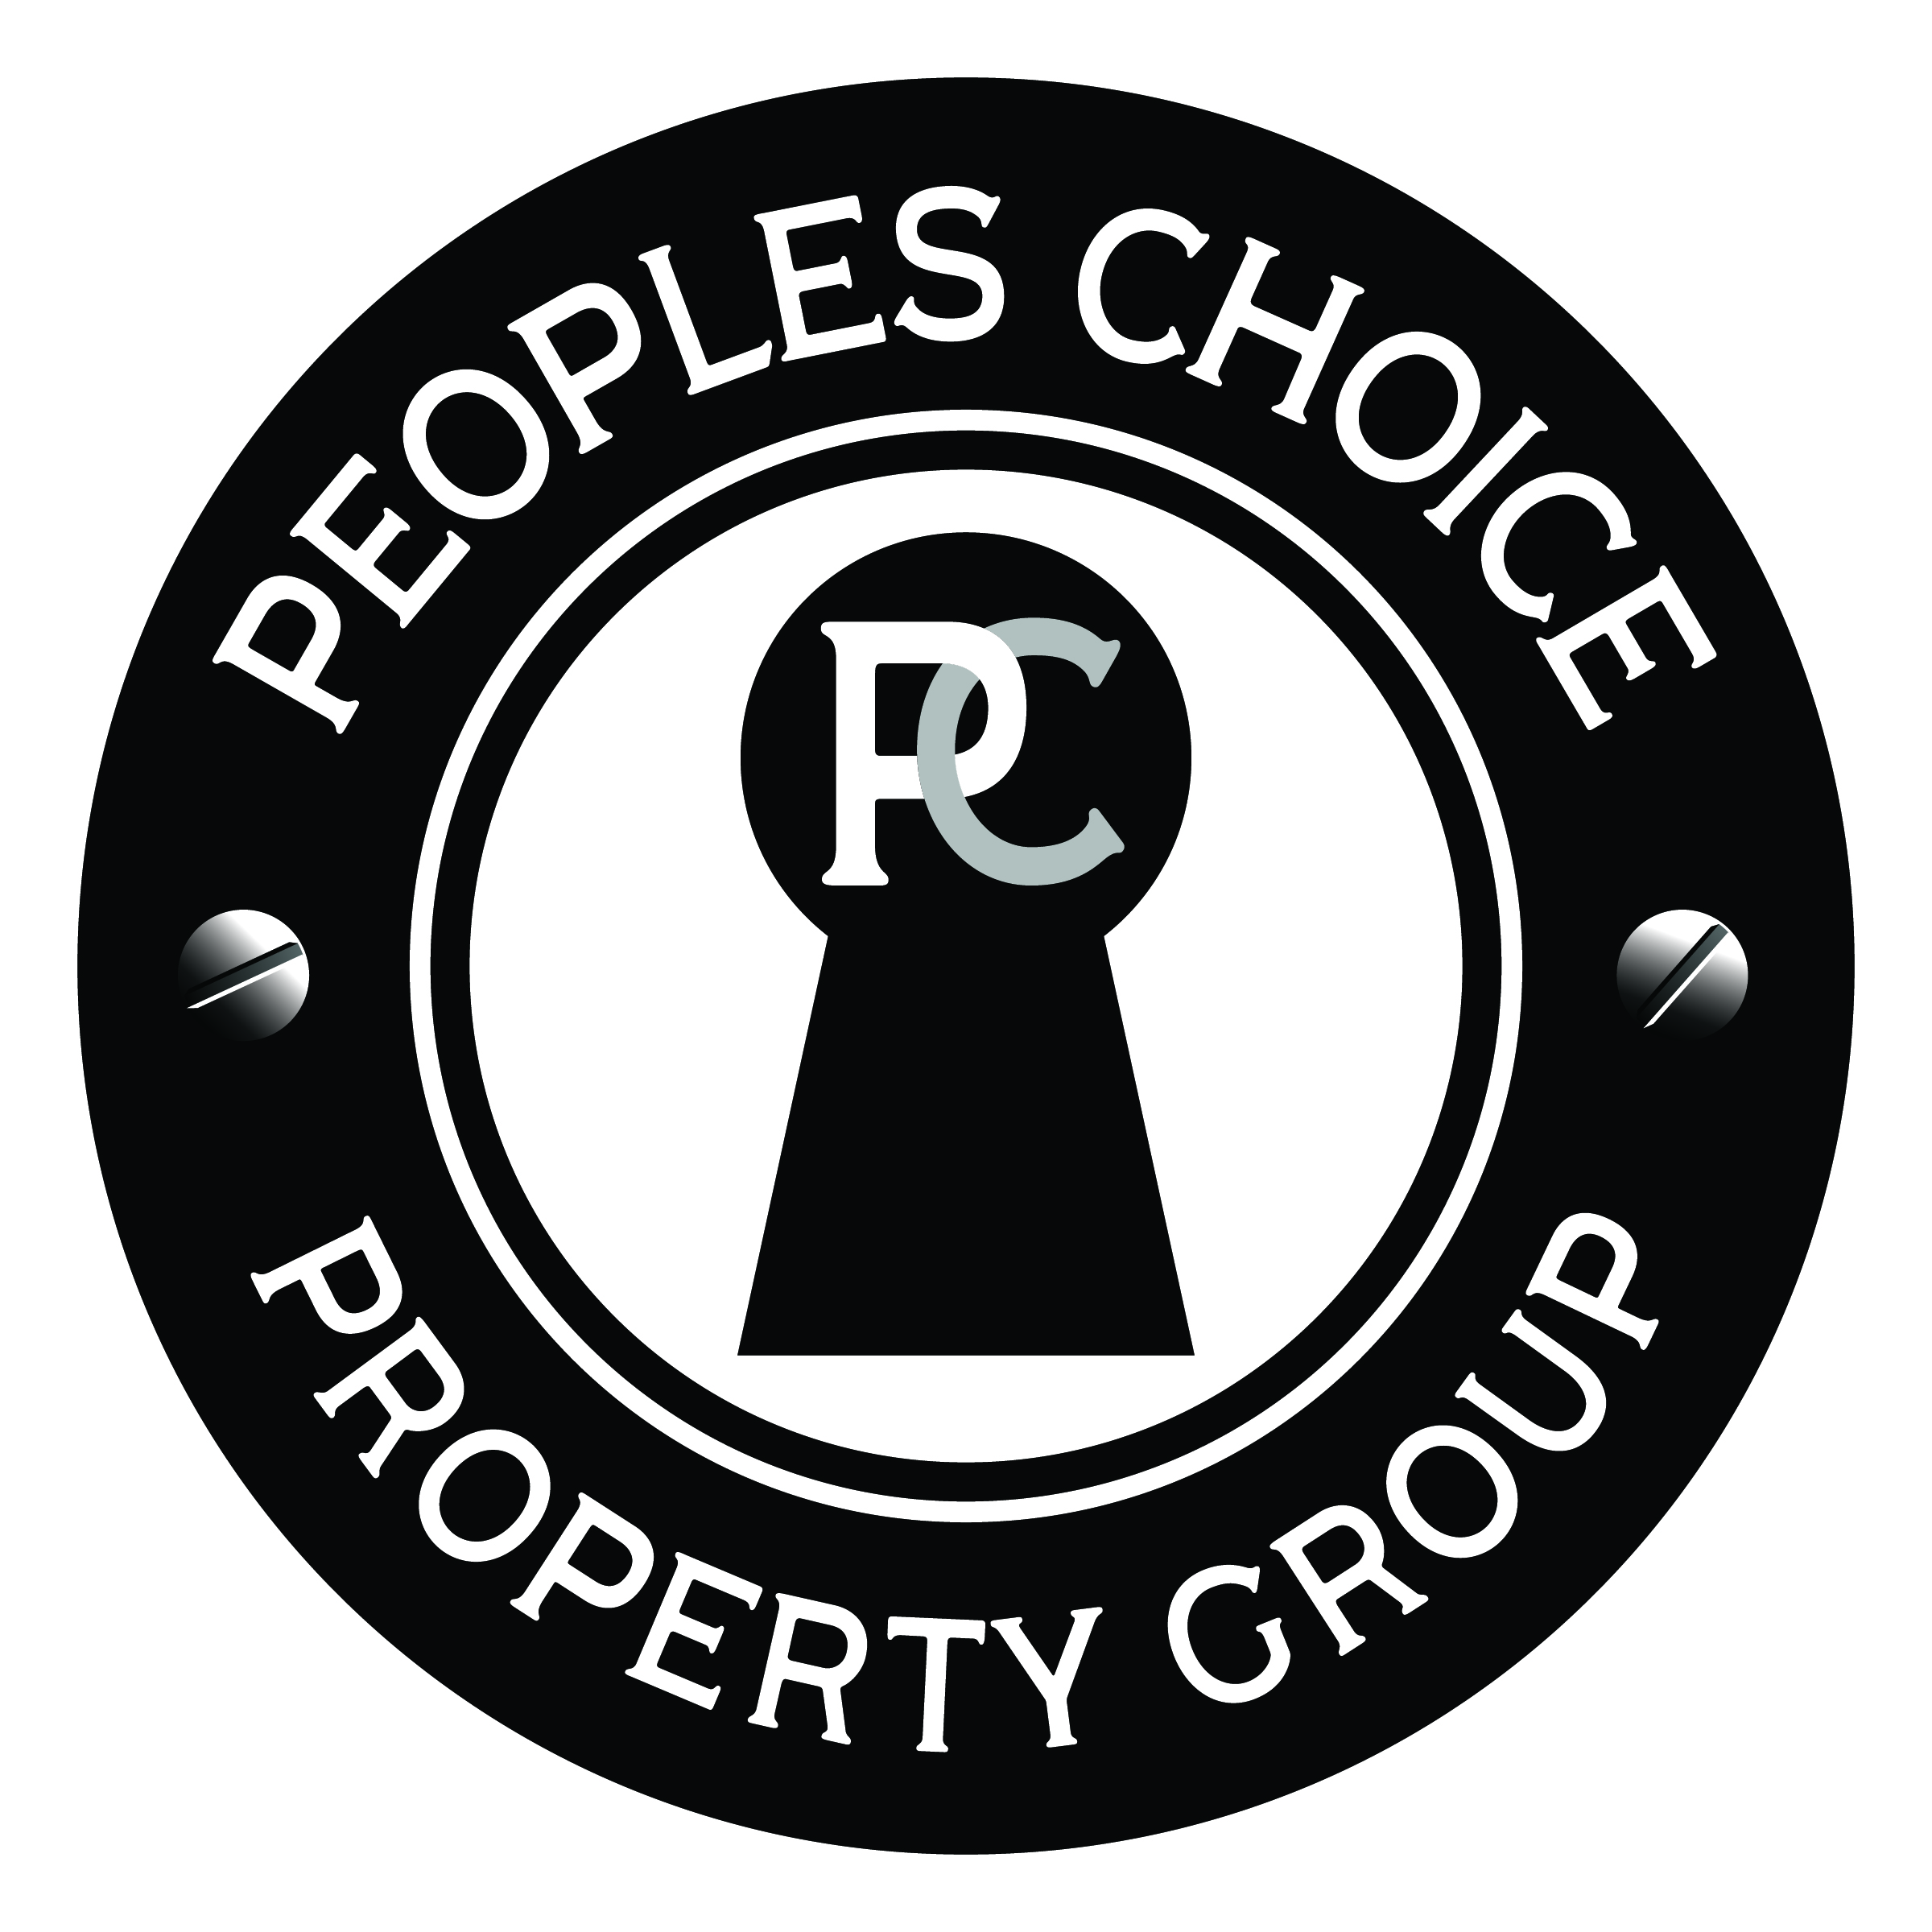 People's Choice Property Group